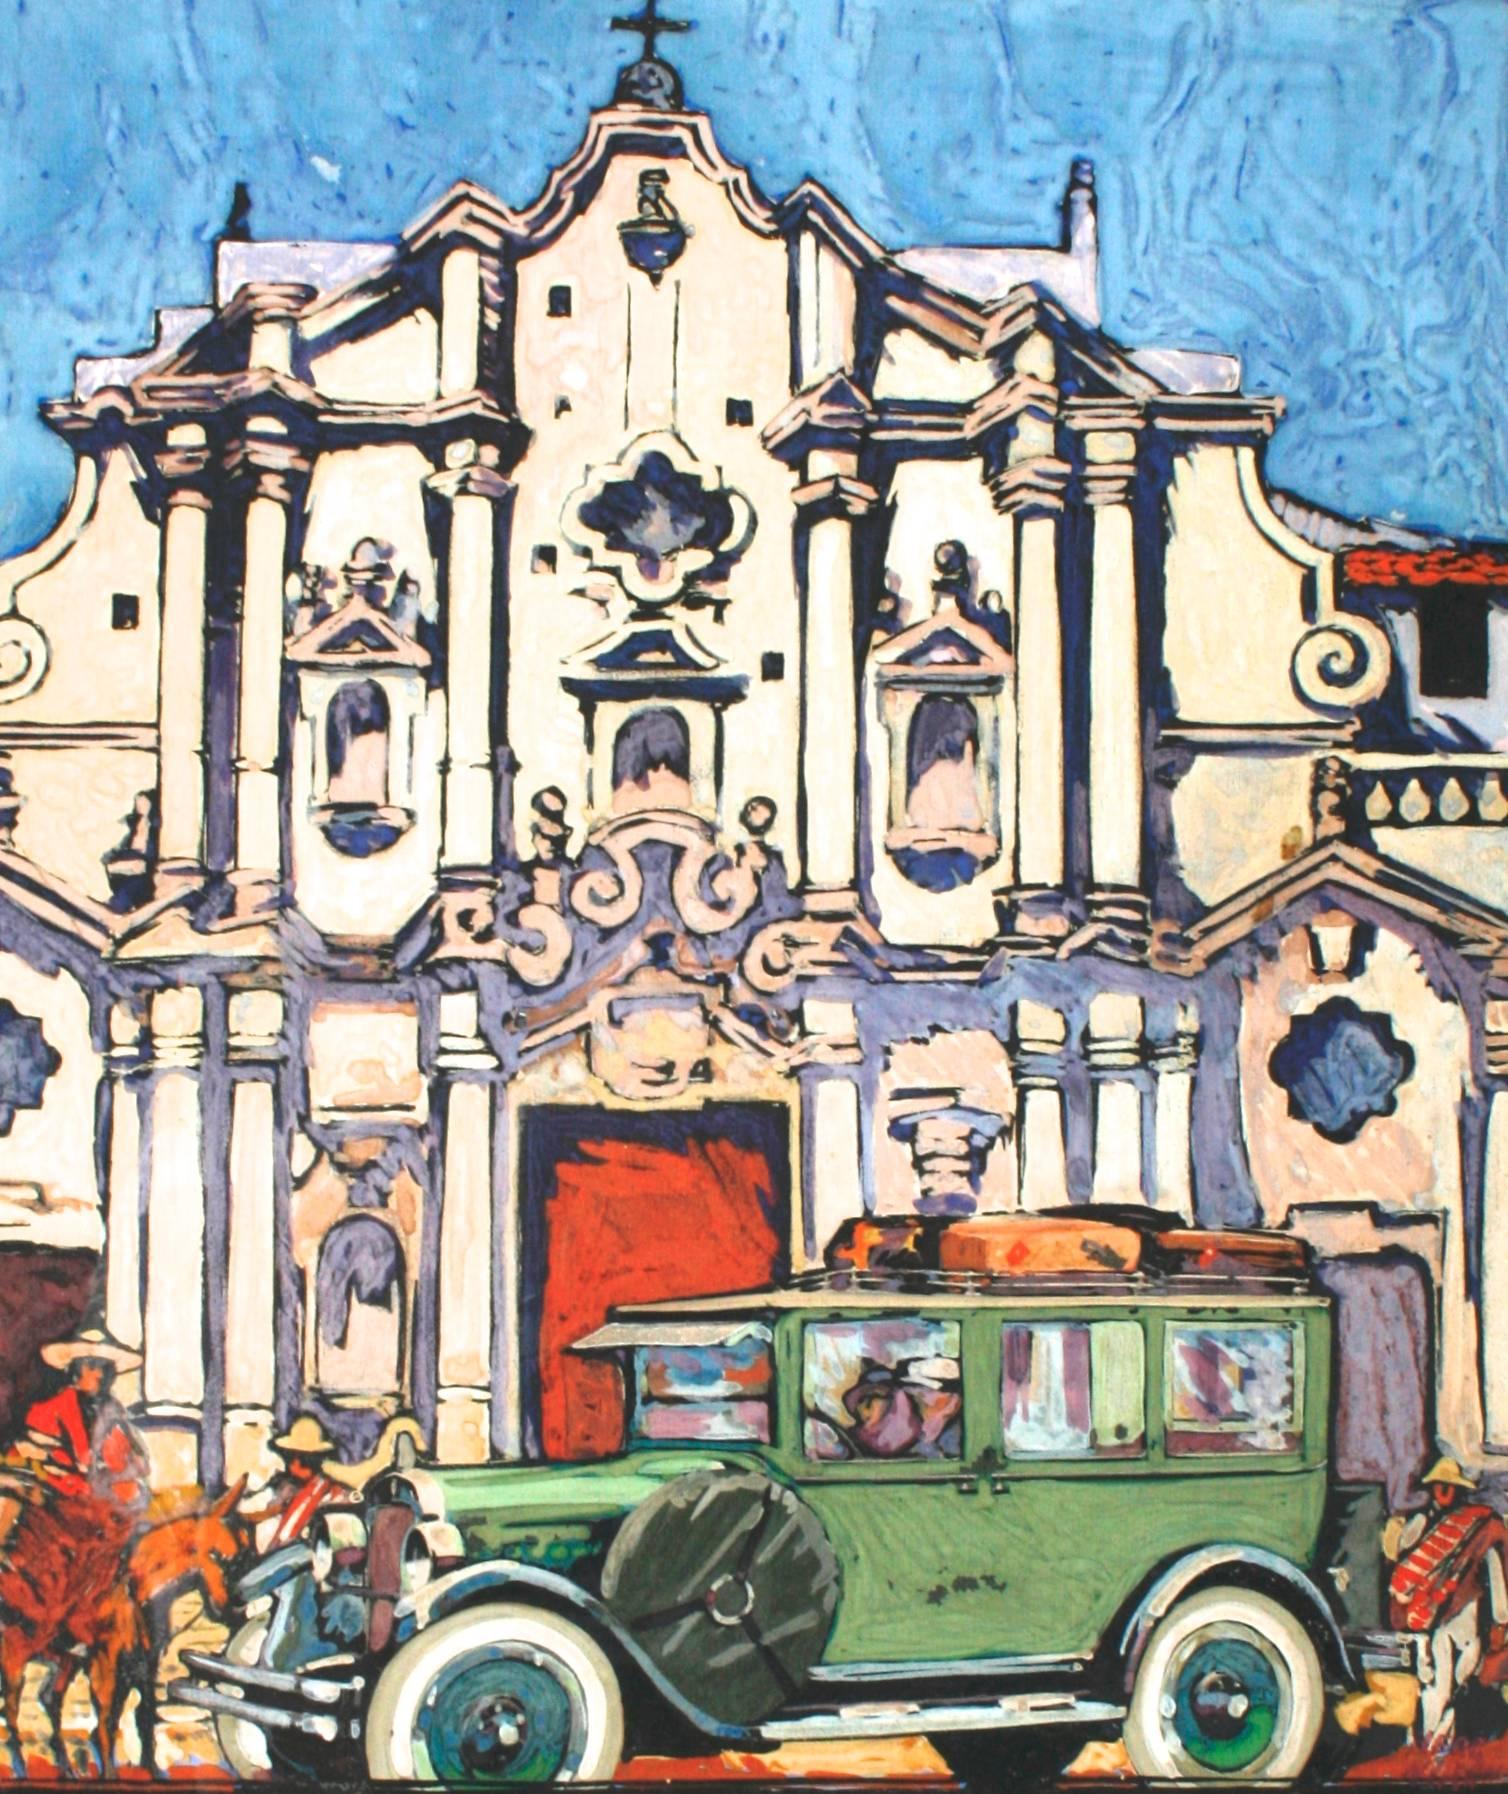 This handsome gouache painting is of the Baroque Cathedral of the Virgin Mary of the Immaculate Conception in Havana Cuba. In front of the cathedral are Cuban figures and a 1928 Ford Model A sedan with luggage. It is framed with a beautifully worn